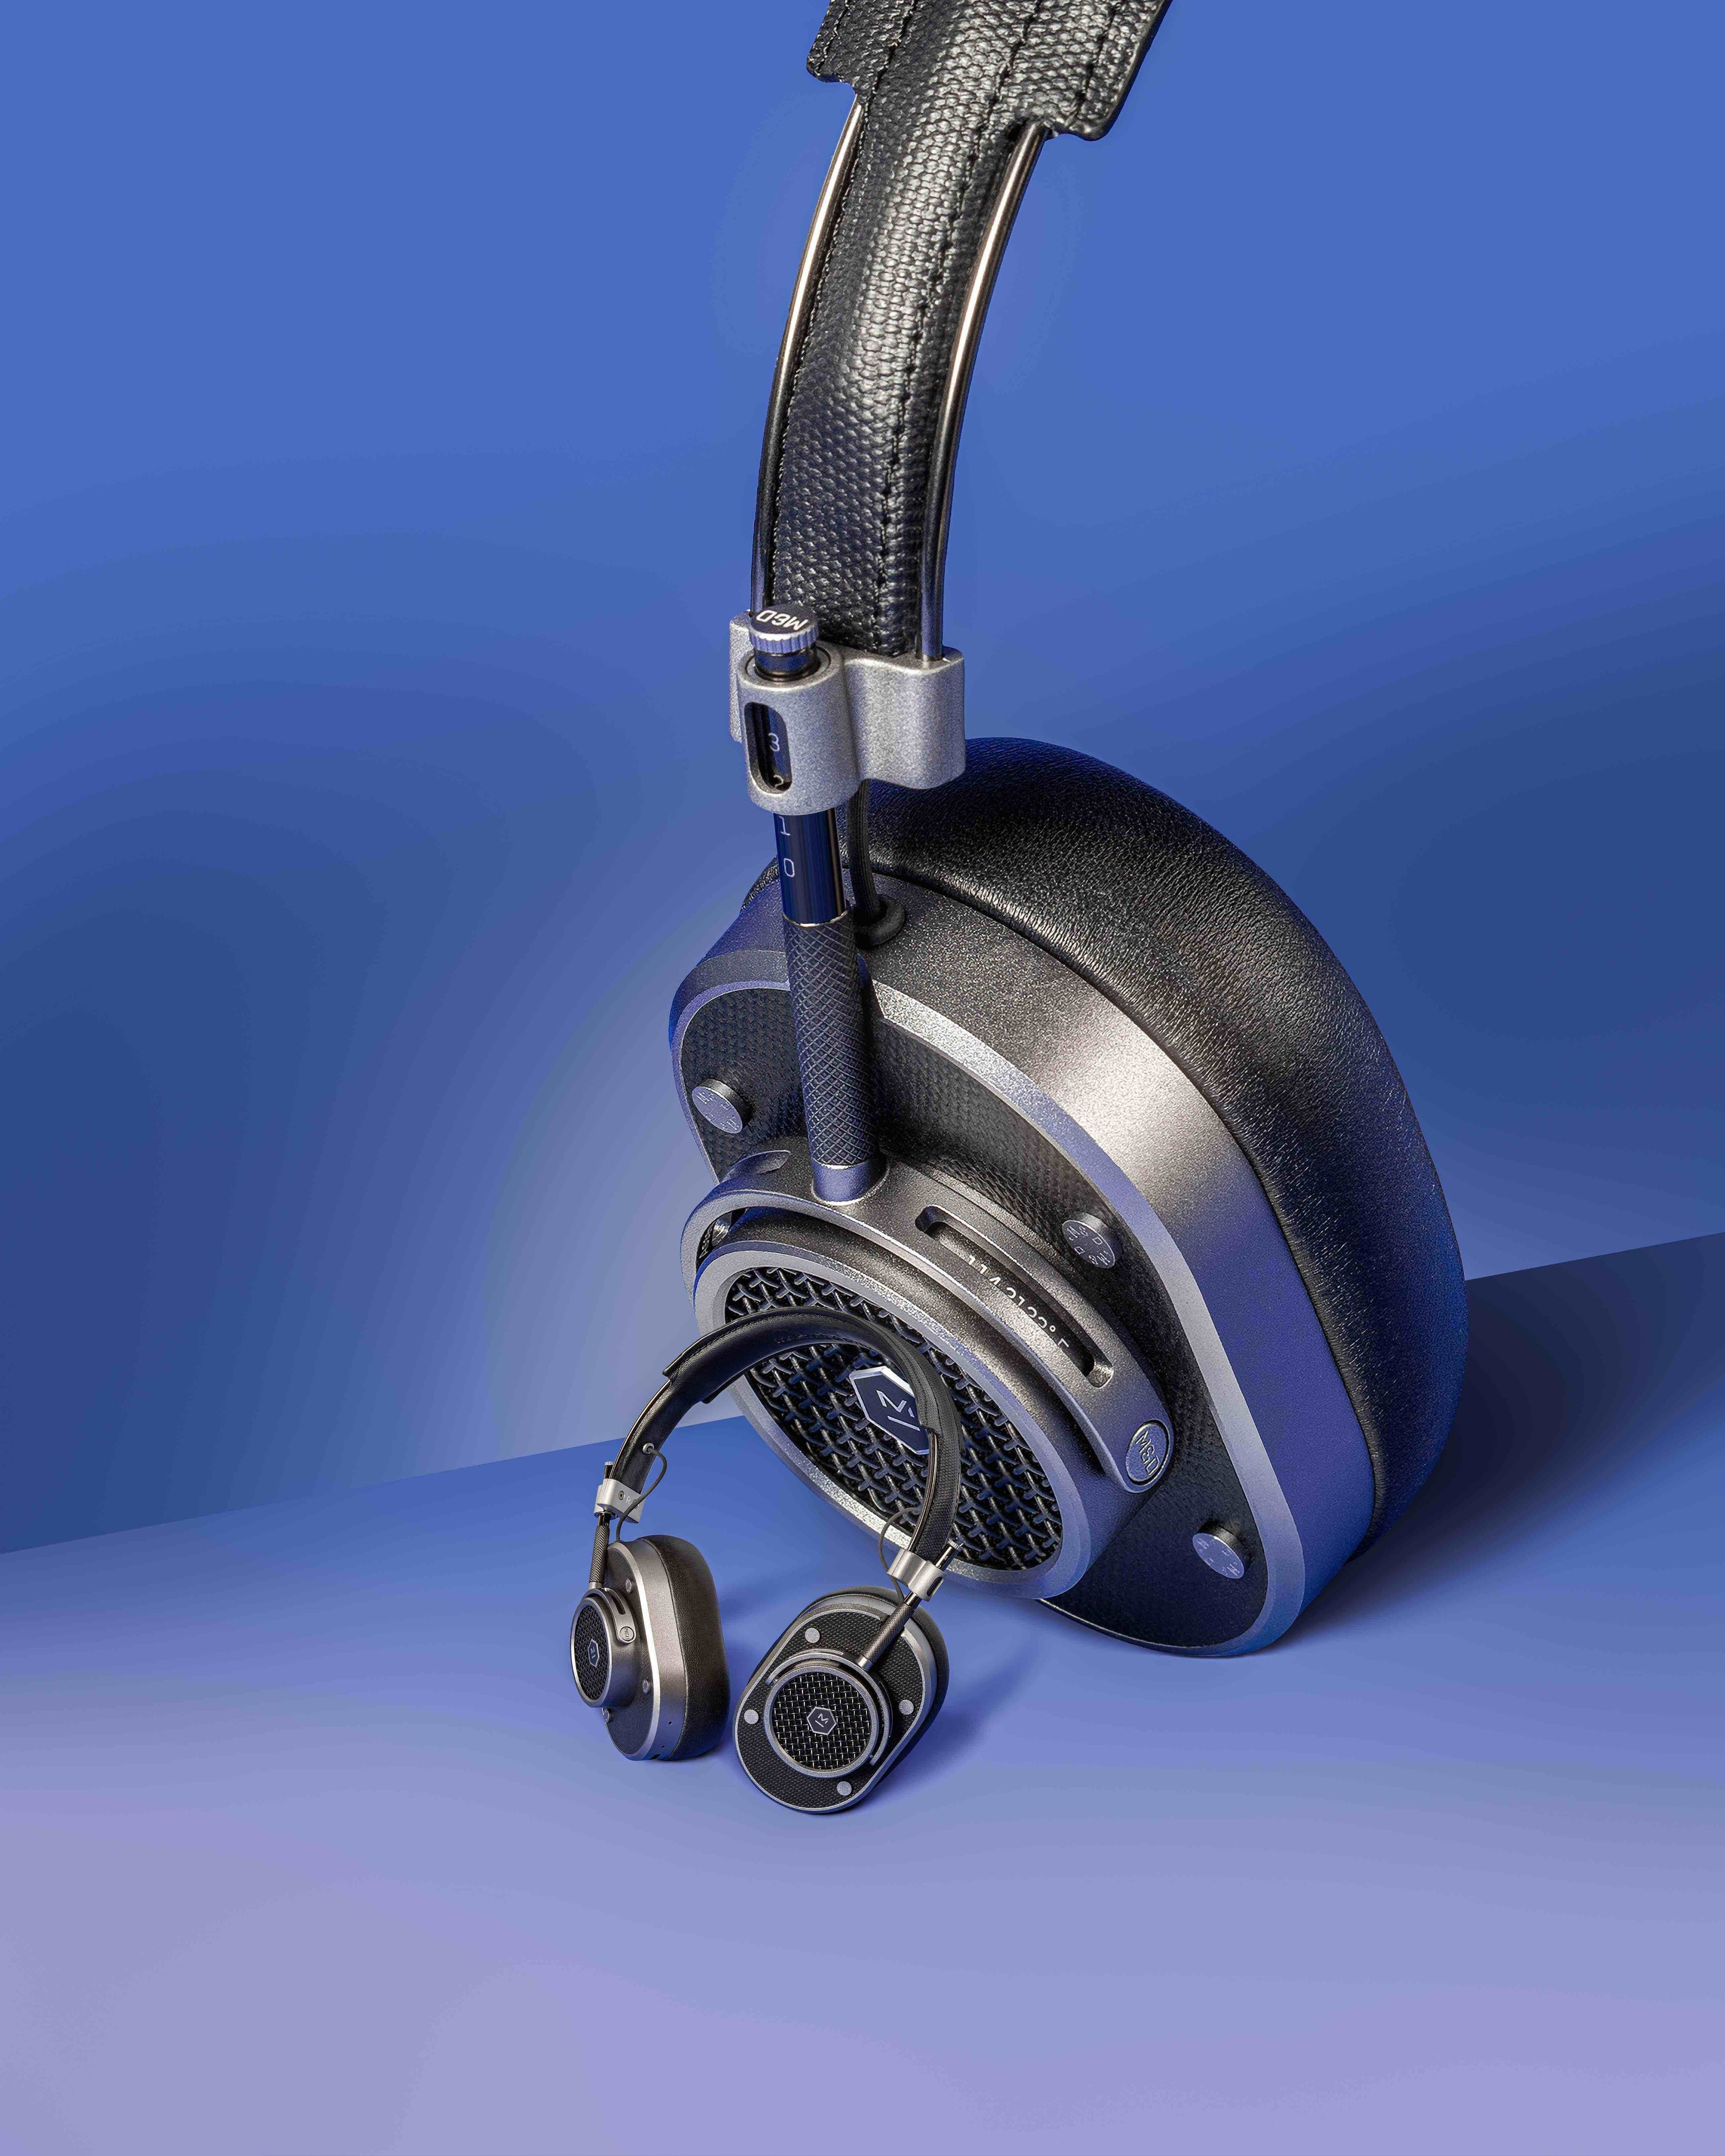 Introducing a New Generation of MH40 Wireless Headphones